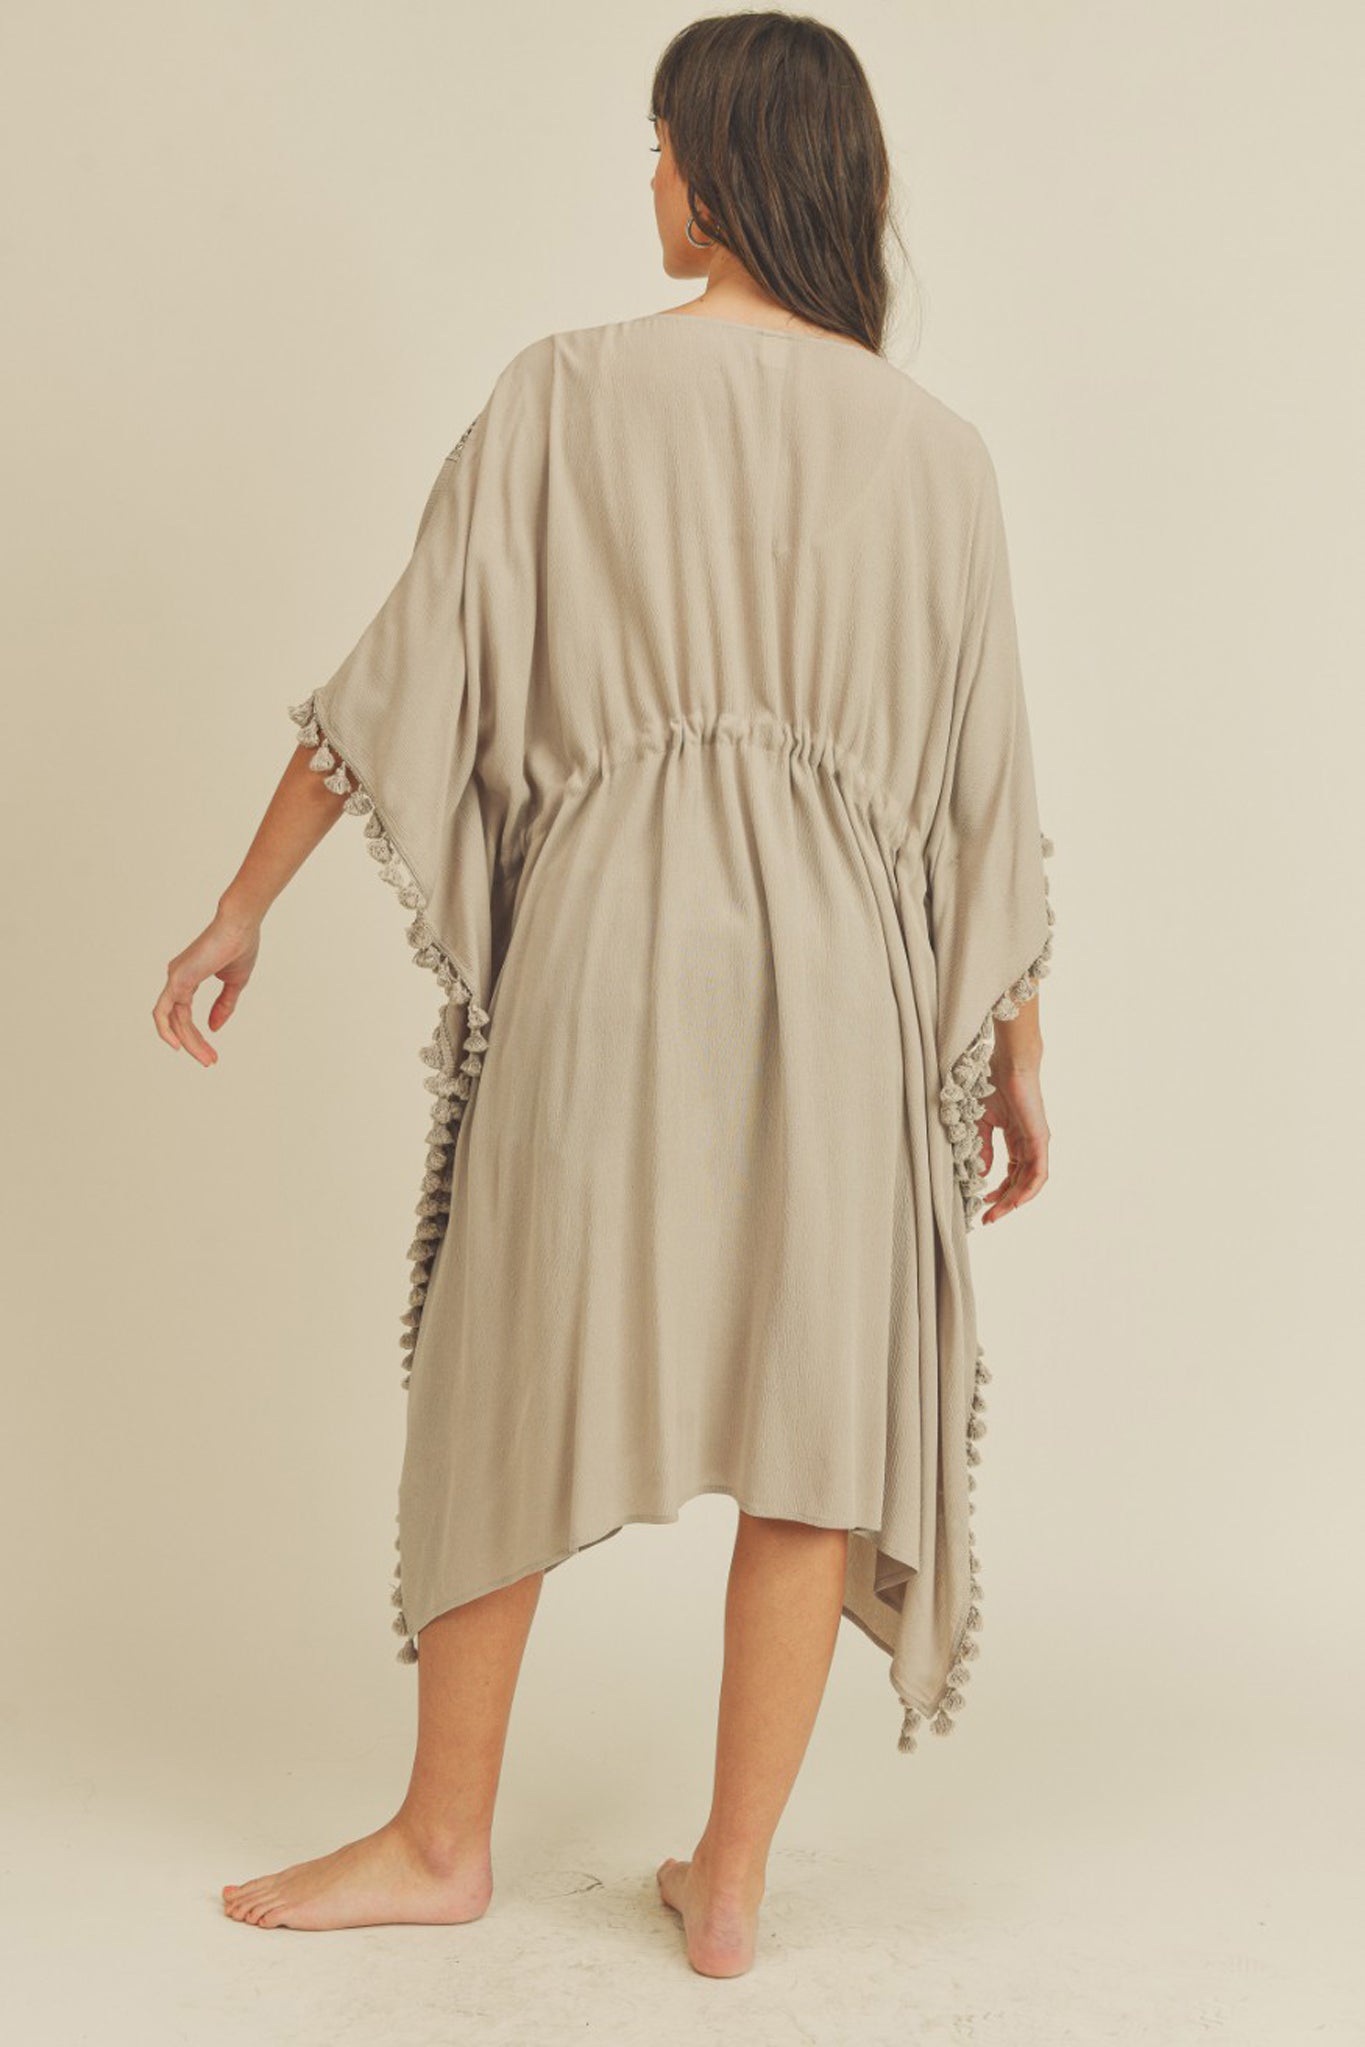 View 5 of Capistrano Tassel Fringe Duster, a Duster from Larrea Cove. Detail: .